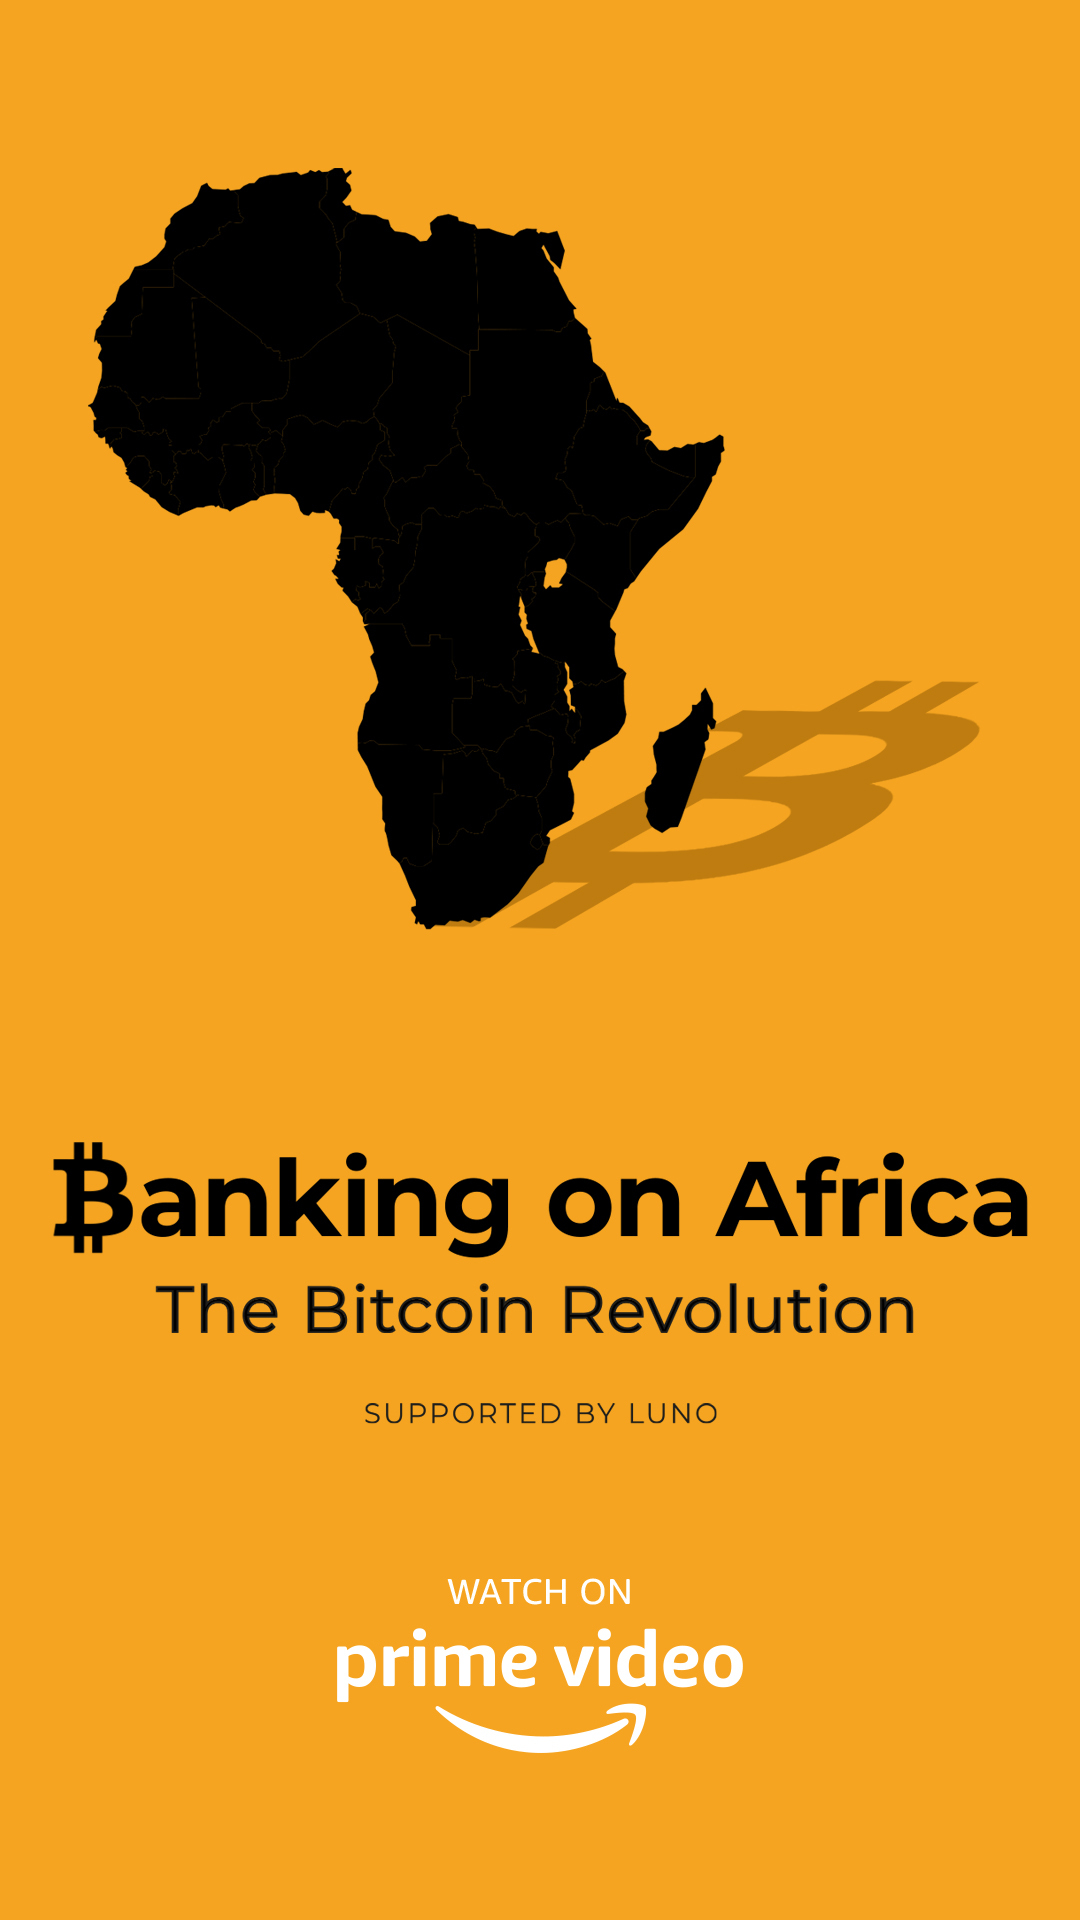 This Bitcoin Documentary From Africa Is Streaming on Amazon Prime - CoinDesk